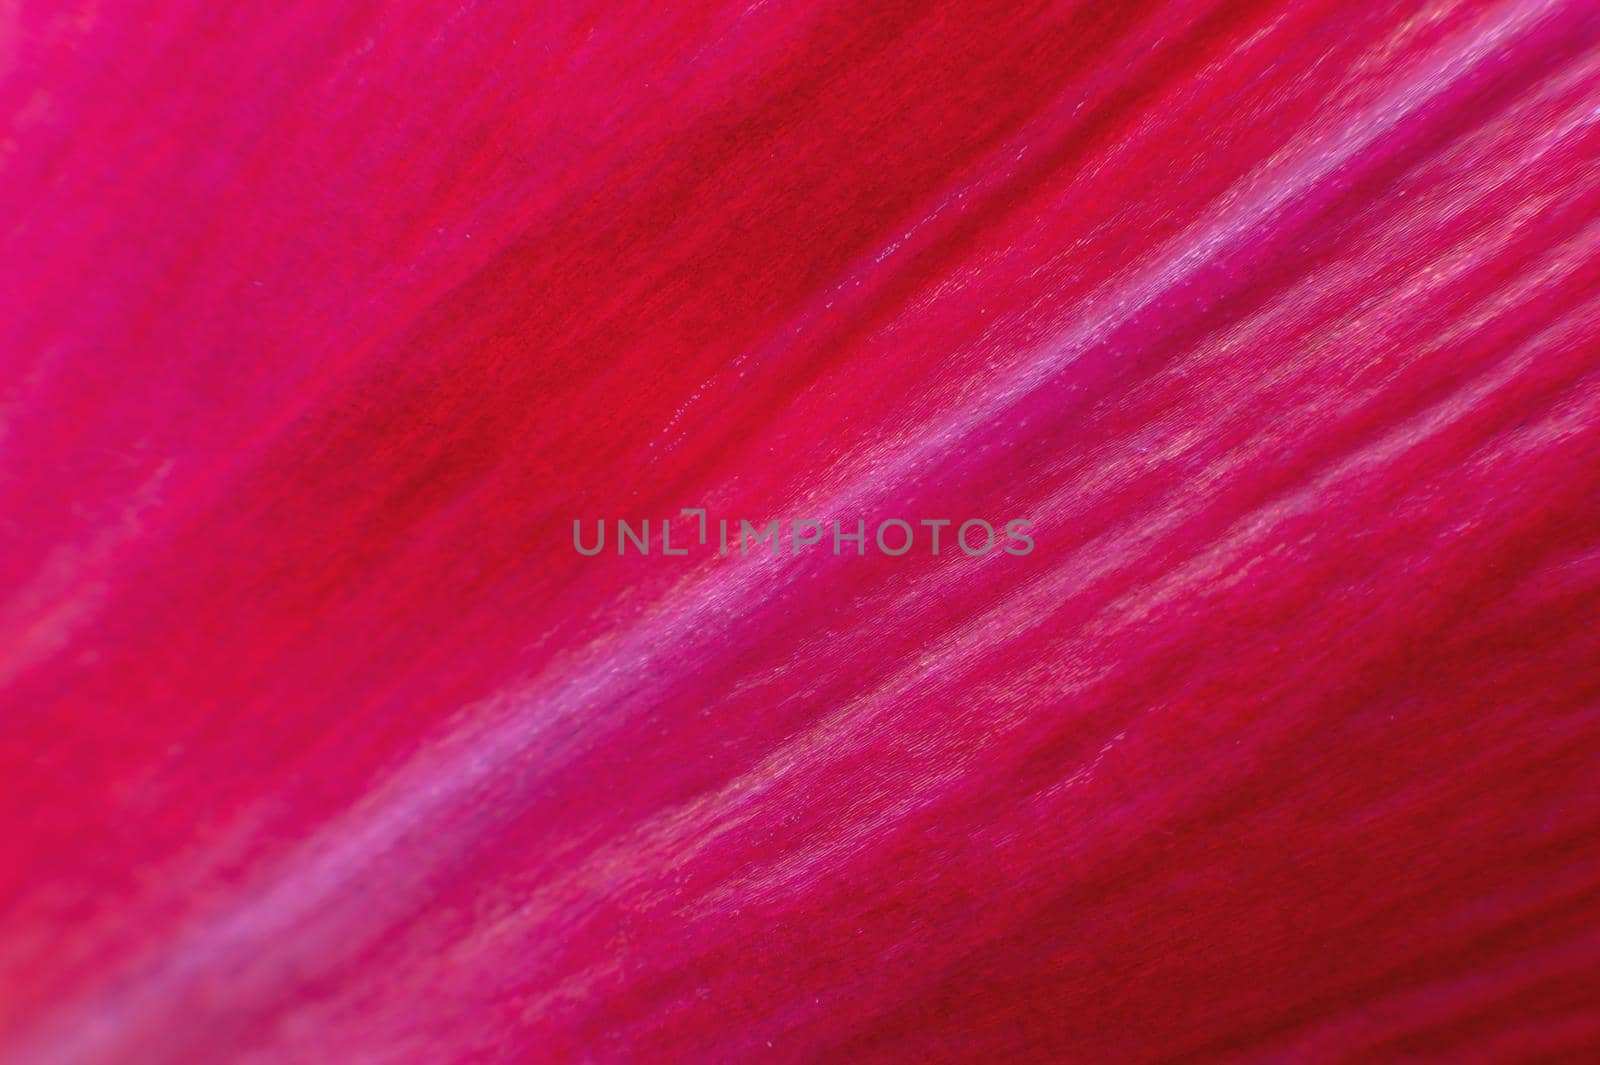 Extreme macro Bright close-up of a flower petal in pink. Abstract flower petal texture background